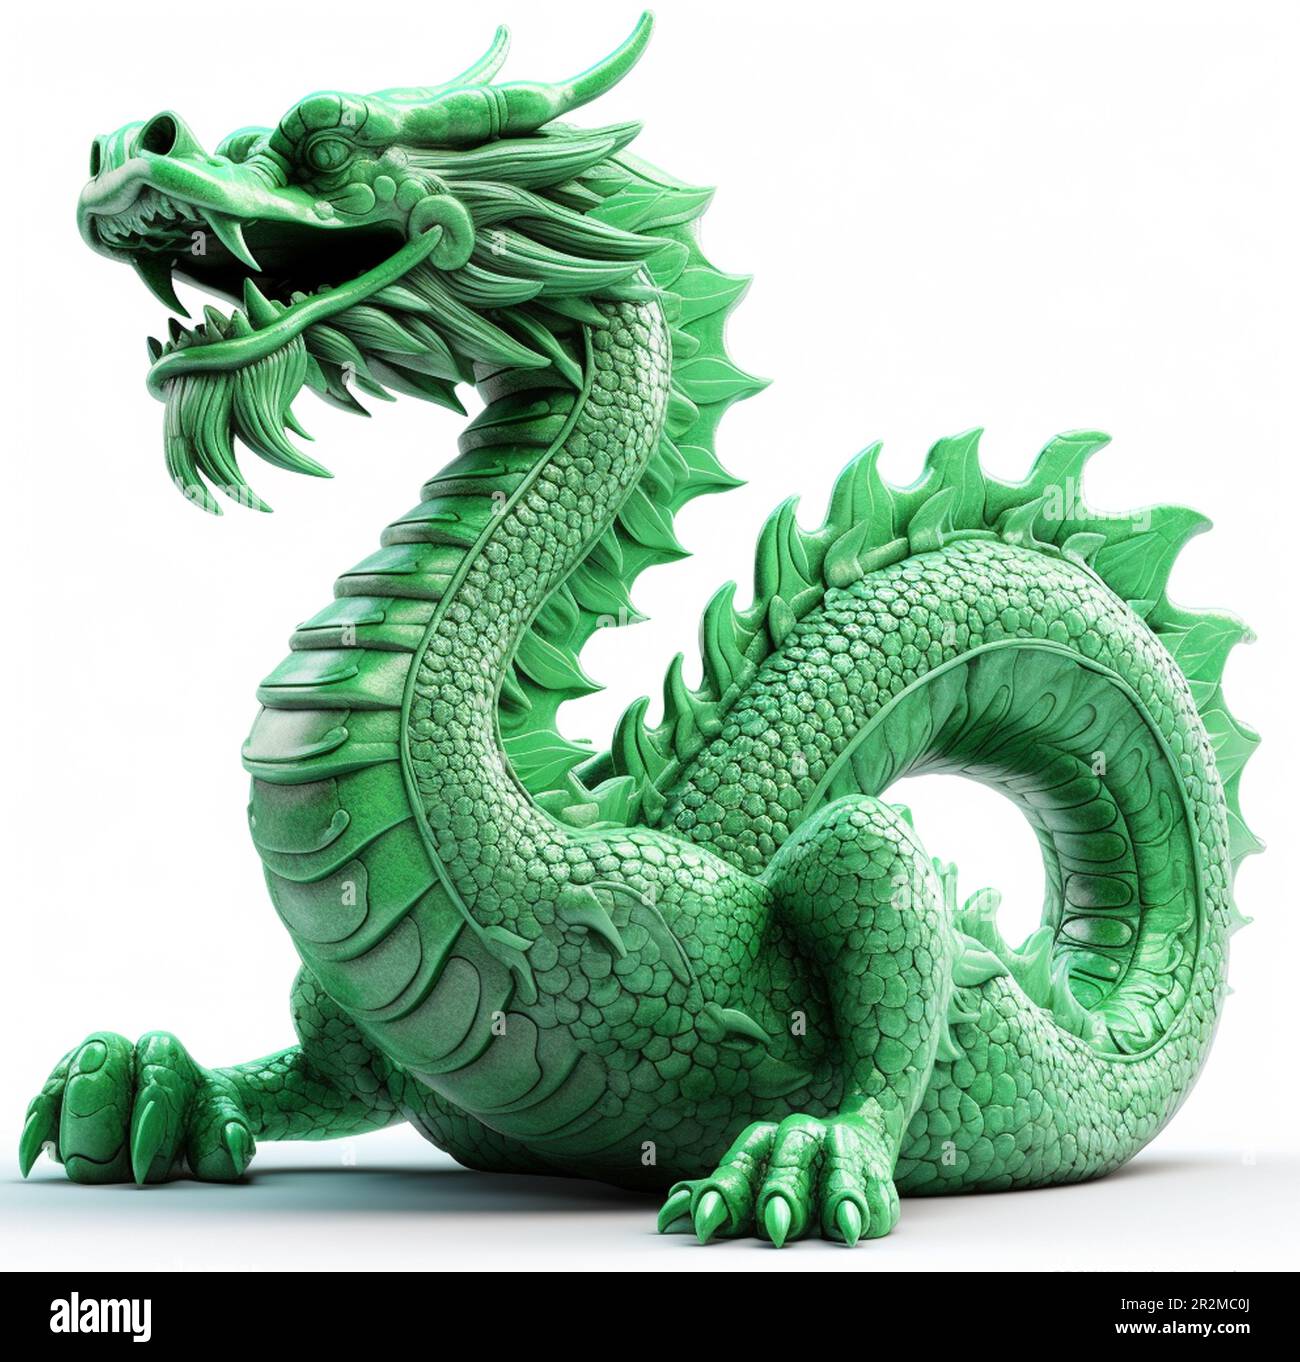 DRAGON IS IN STOCK